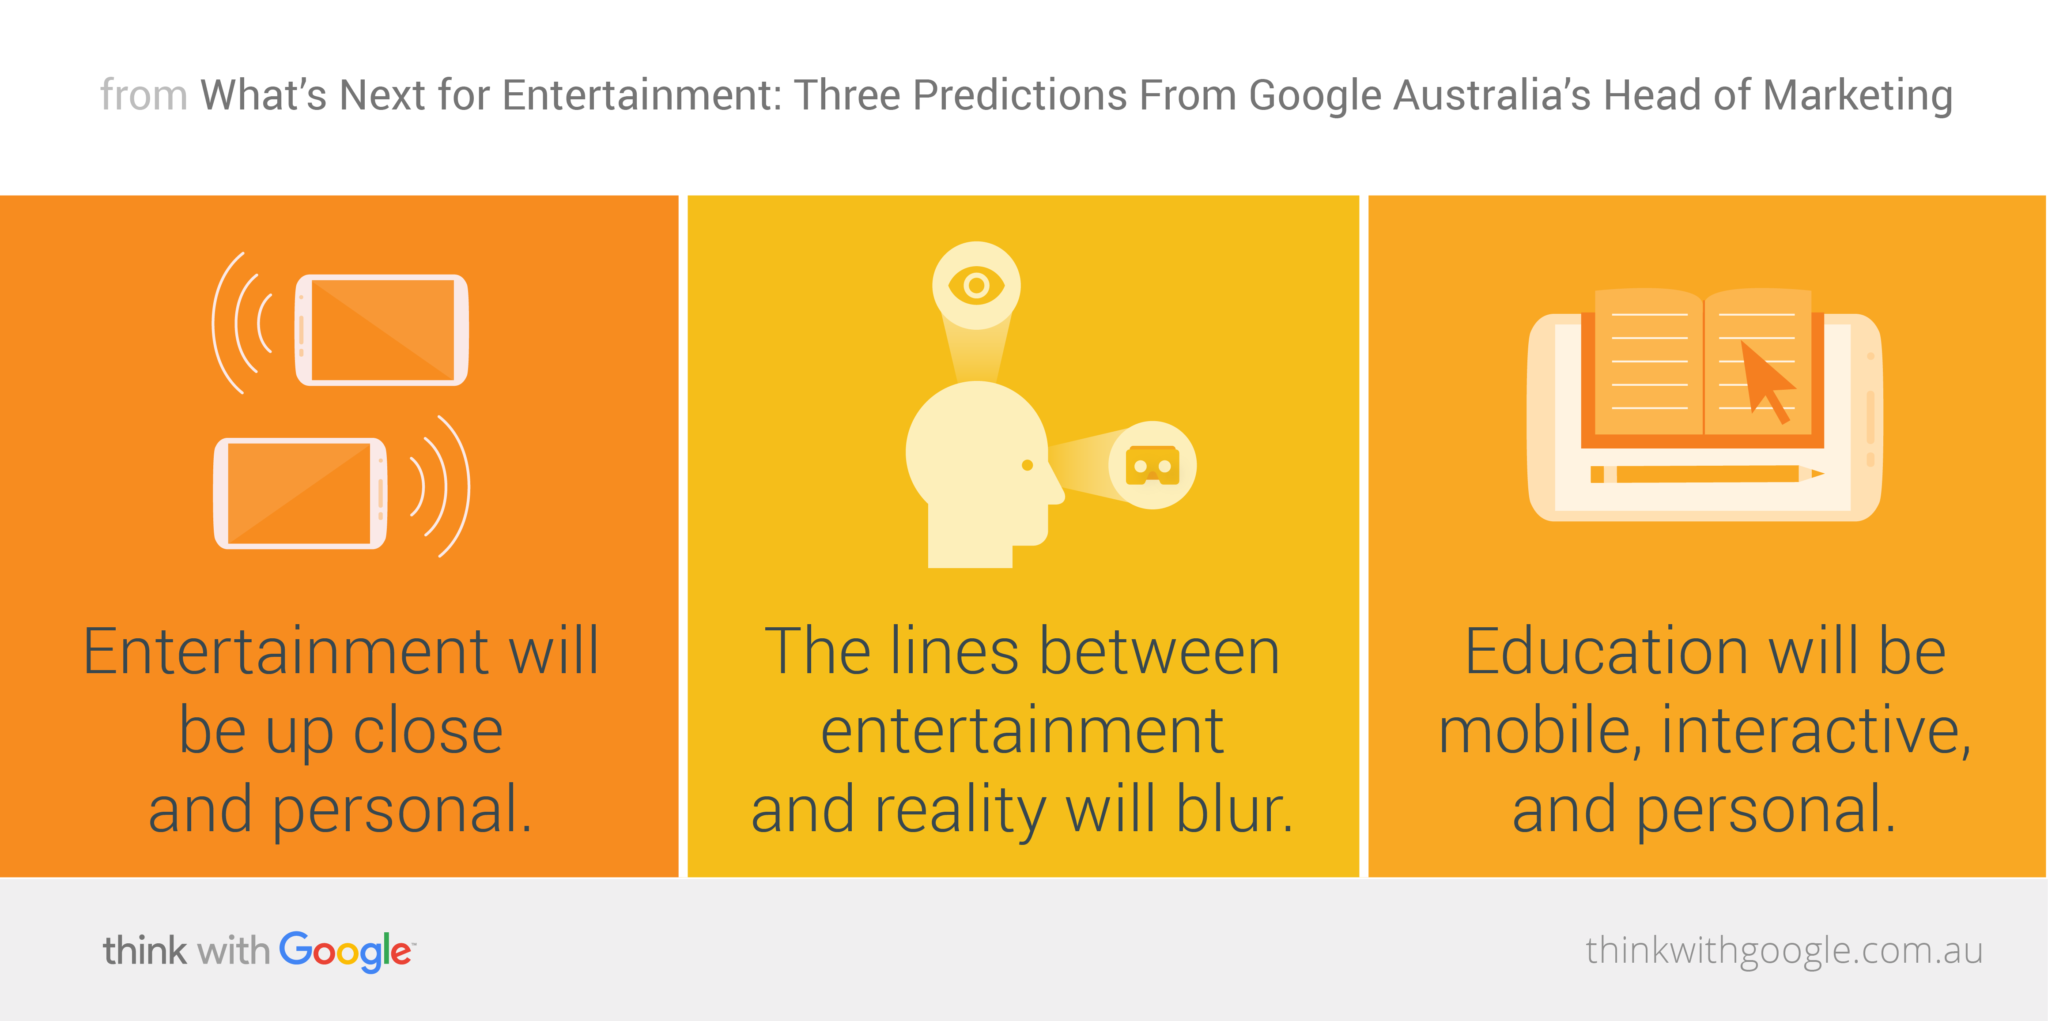 whats-next-entertainment-three-predictions-from-google-australias-head-marketing-nugget-download